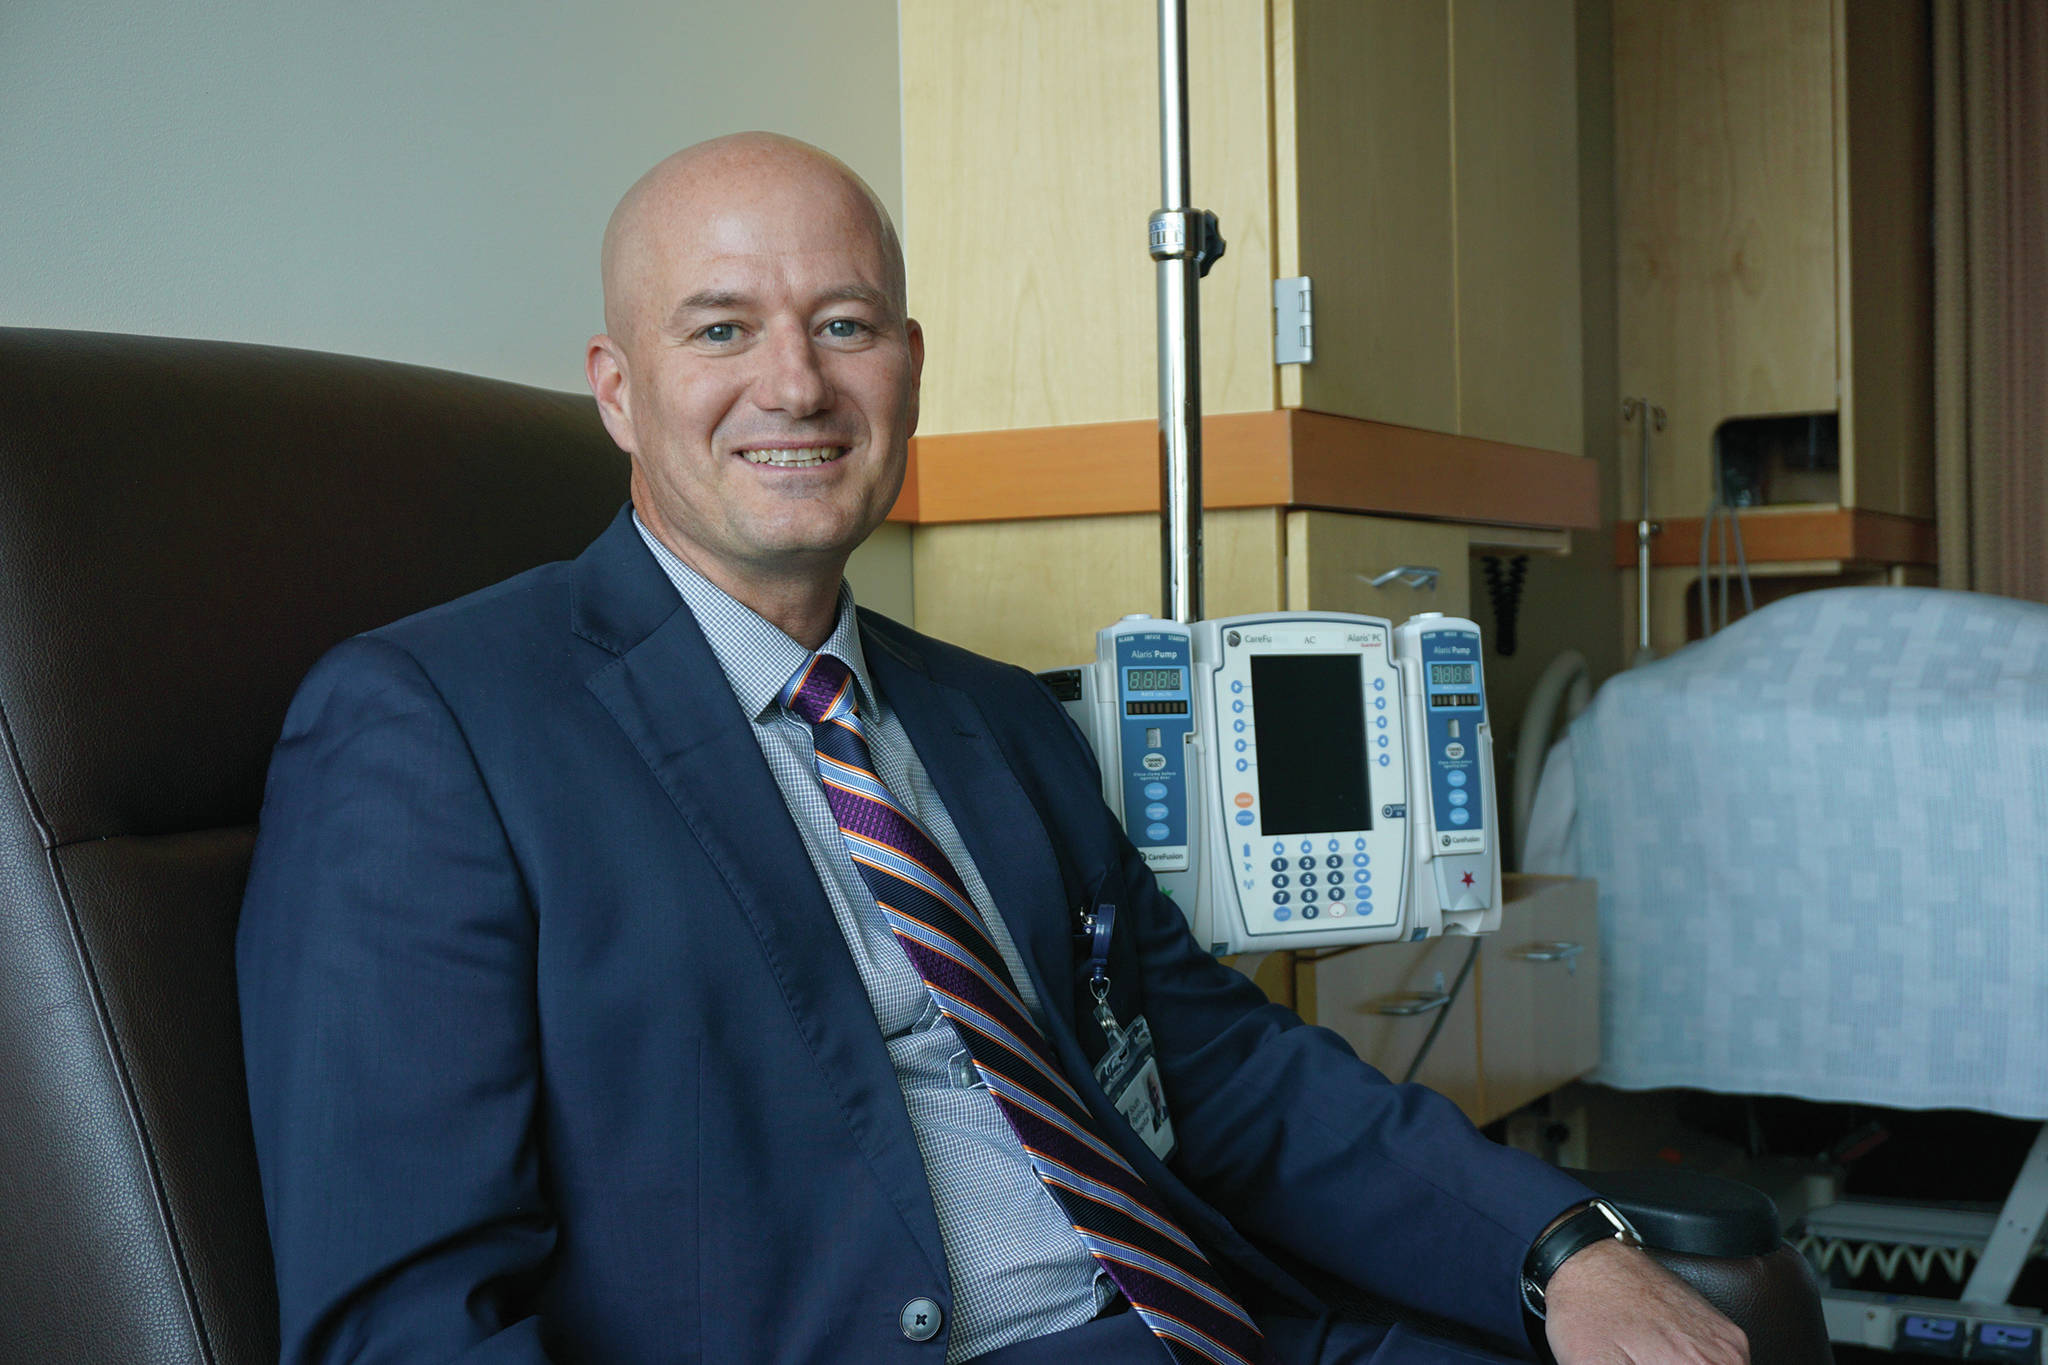 New South Peninsula Hospital Chief Executive Officer Ryan Smith poses for a photo in a visiting chair in one of the patient rooms on his first official day of work, Aug. 26, 2019, in Homer, Alaska. (Photo by Michael Armstrong/Homer News)